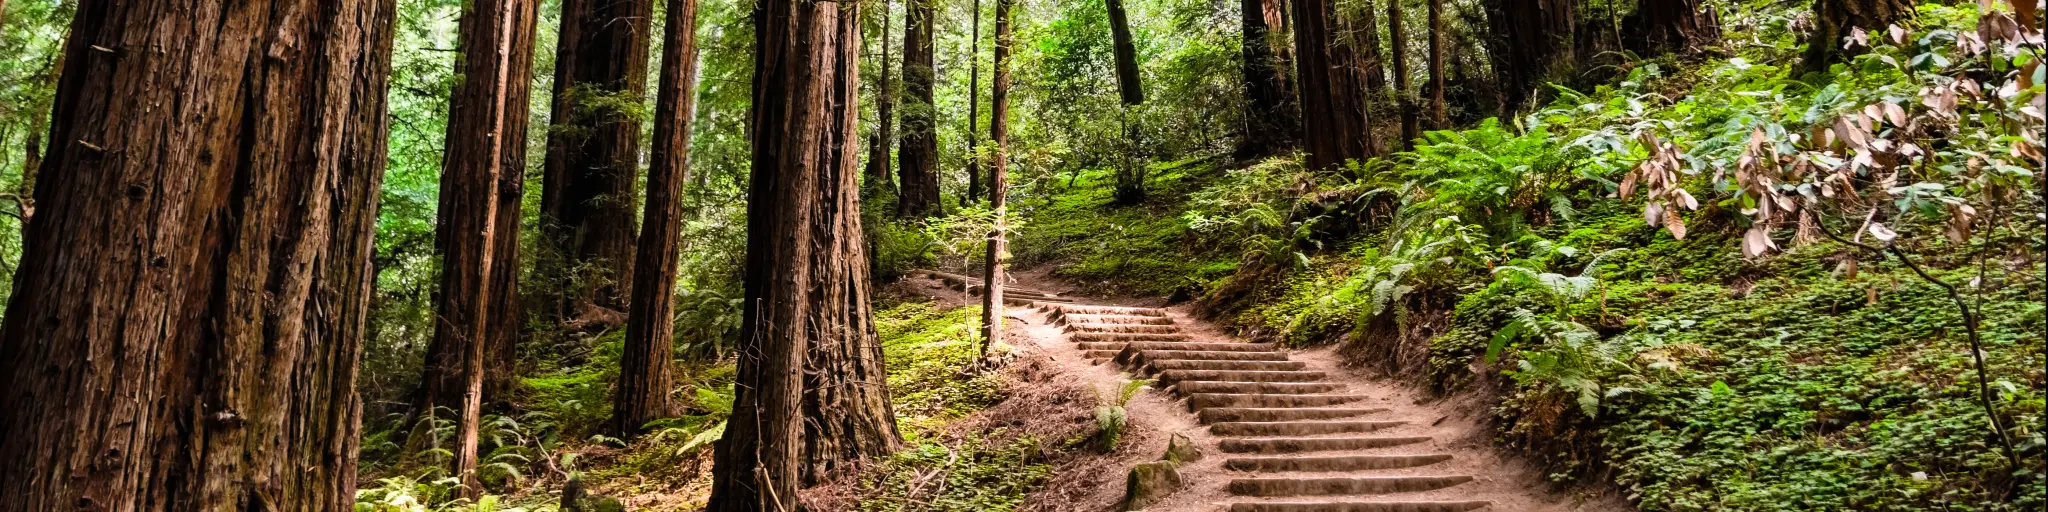 Hiking trail going through redwood forest of Muir Woods National Monument